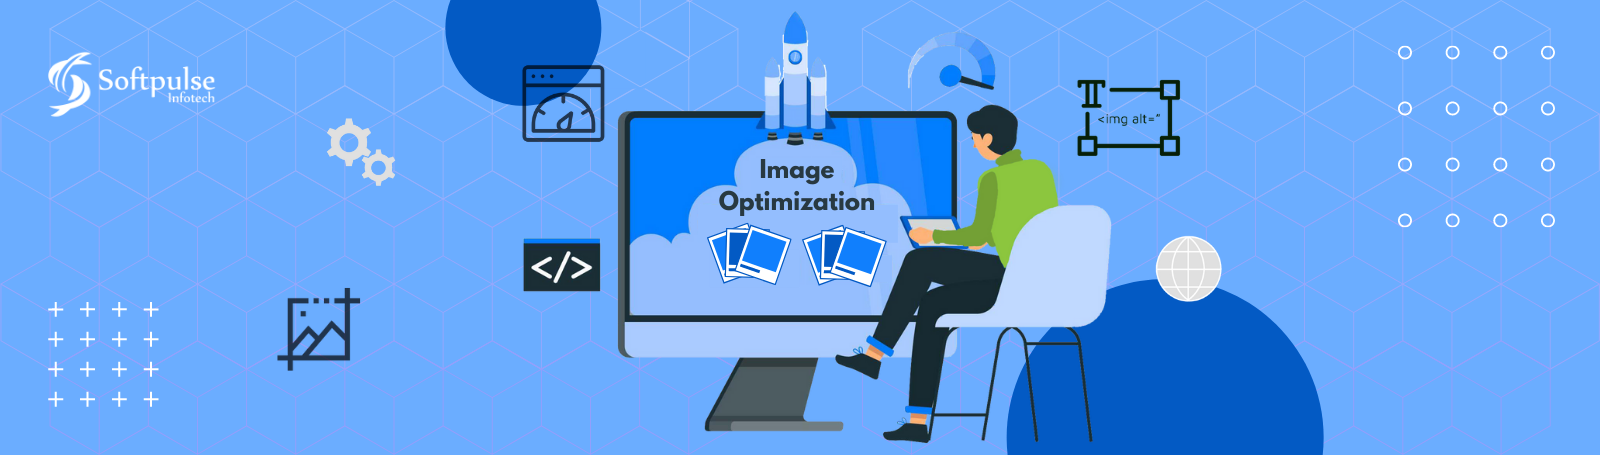 Why Image Optimization is Important for eCommerce Stores?